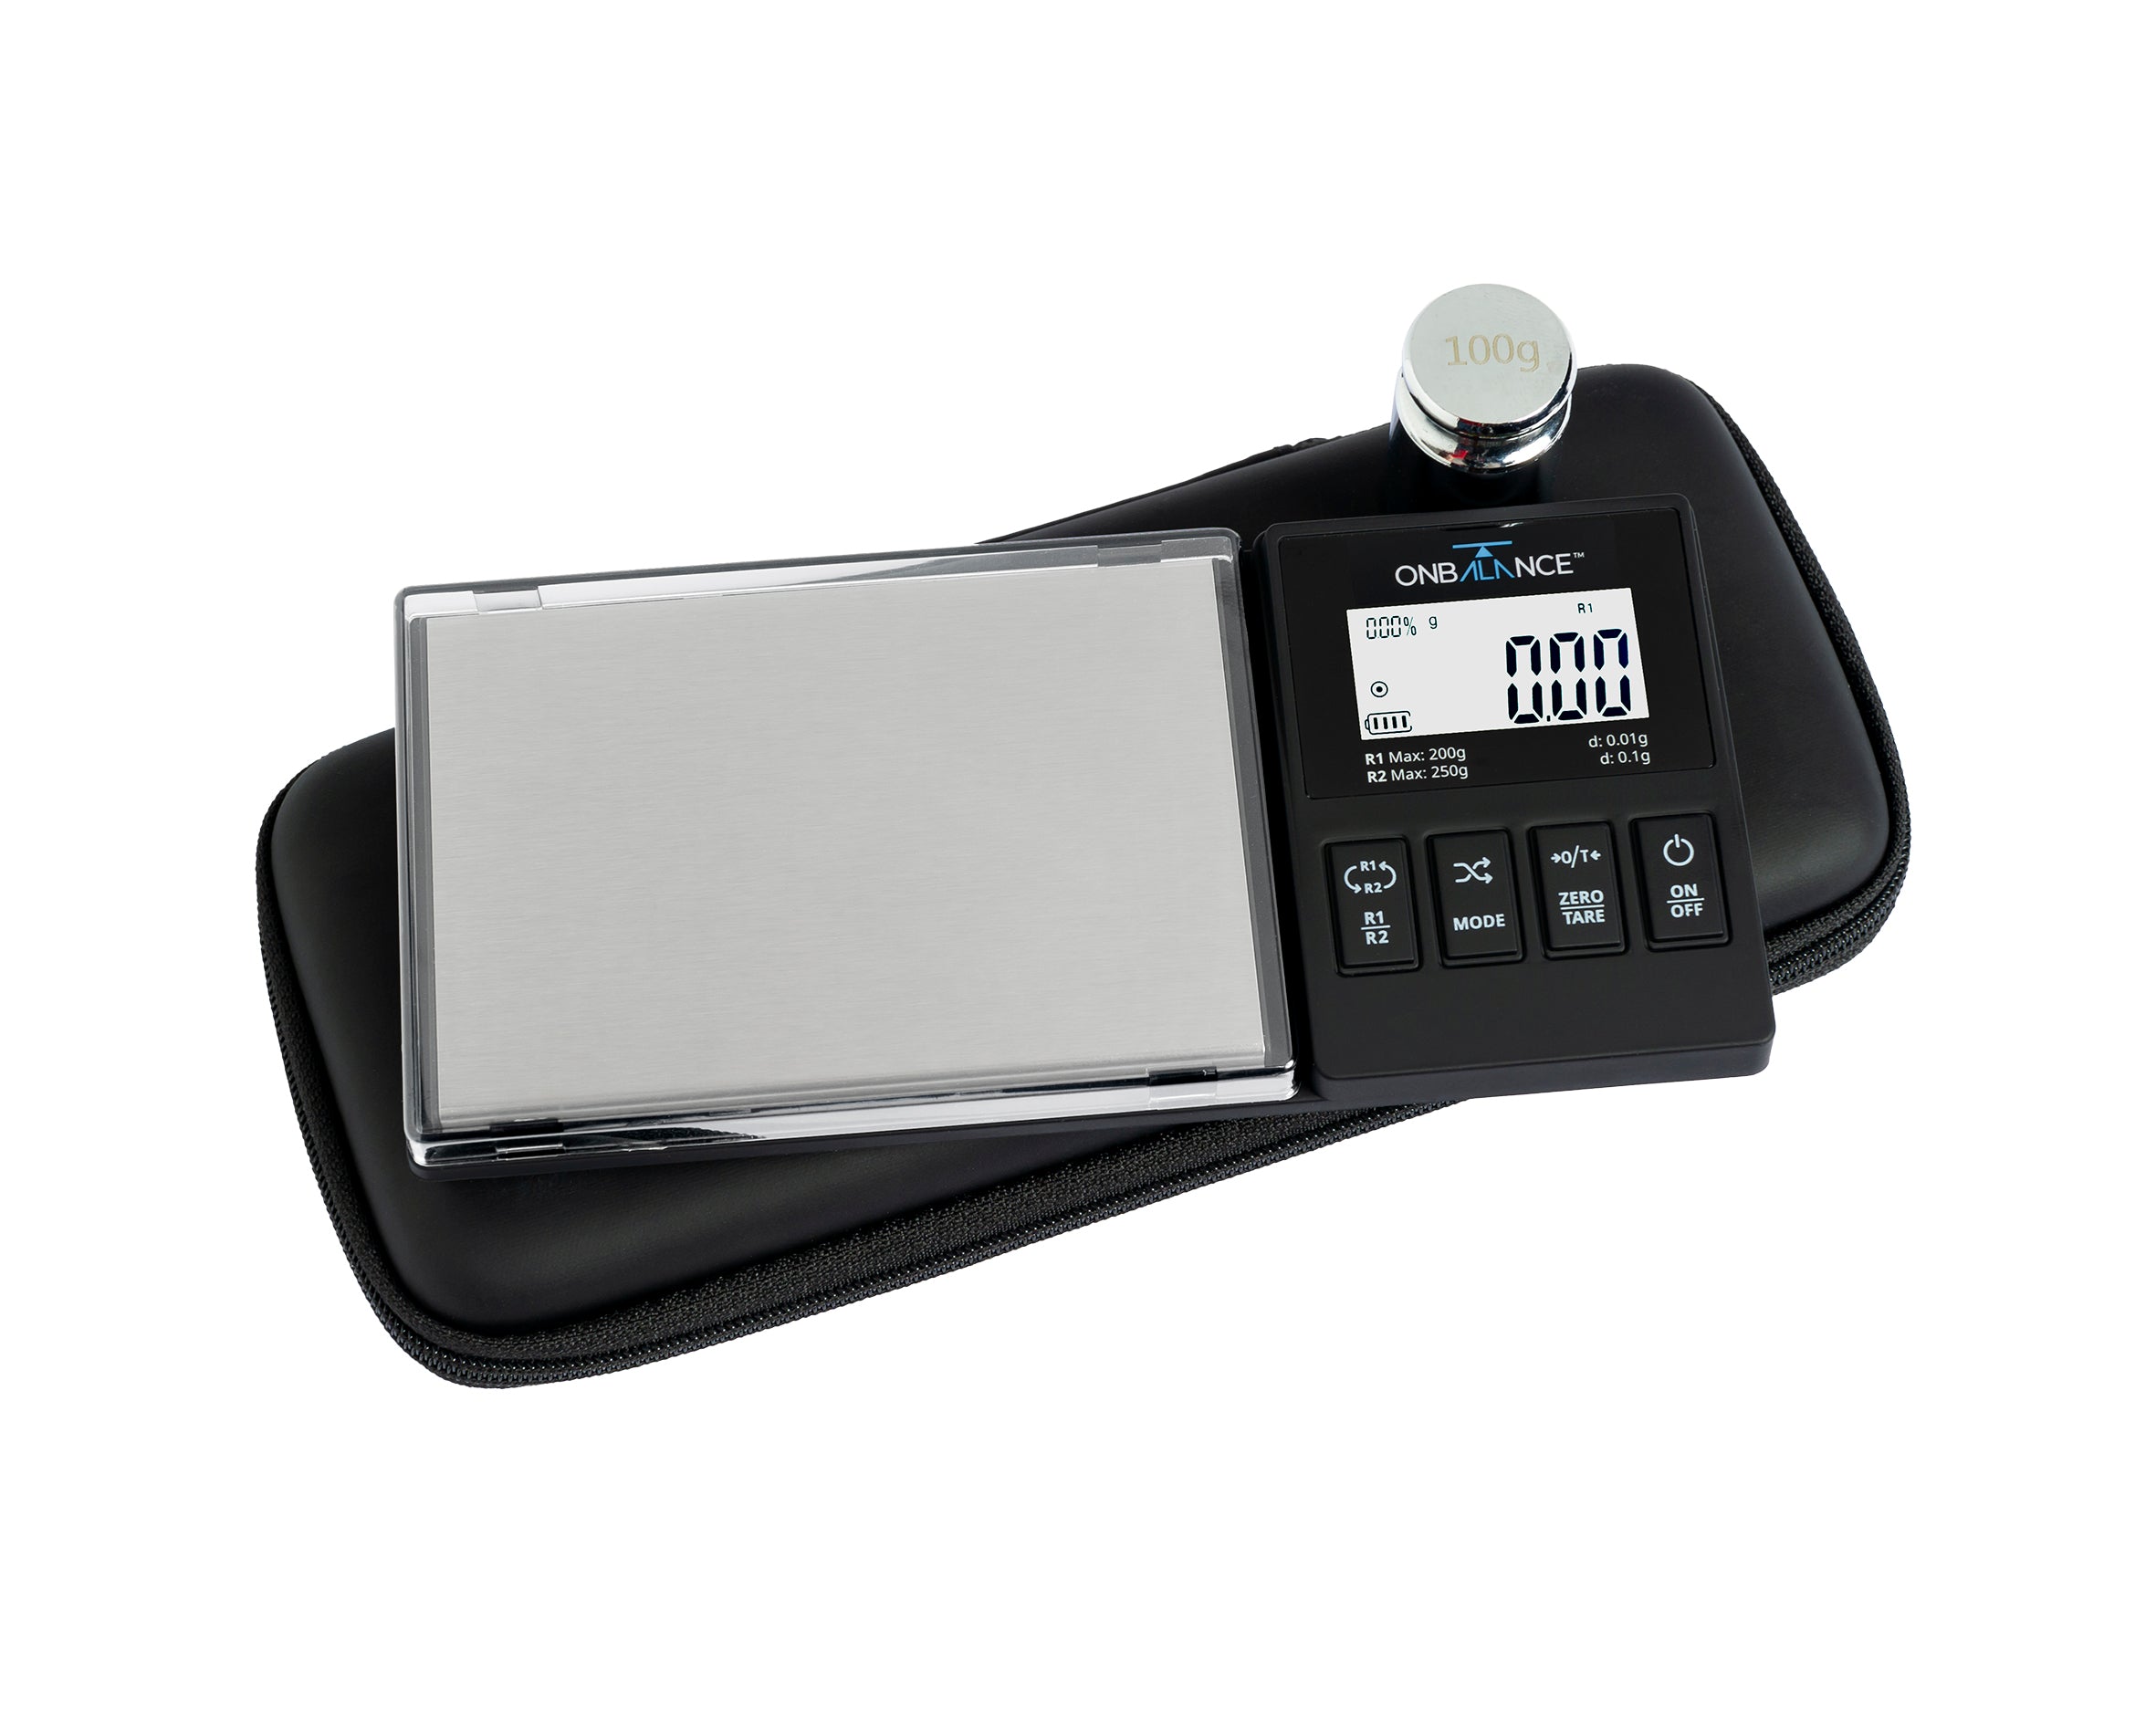 How to Use Digital Scales to Taper Safely - The Truweigh Blog